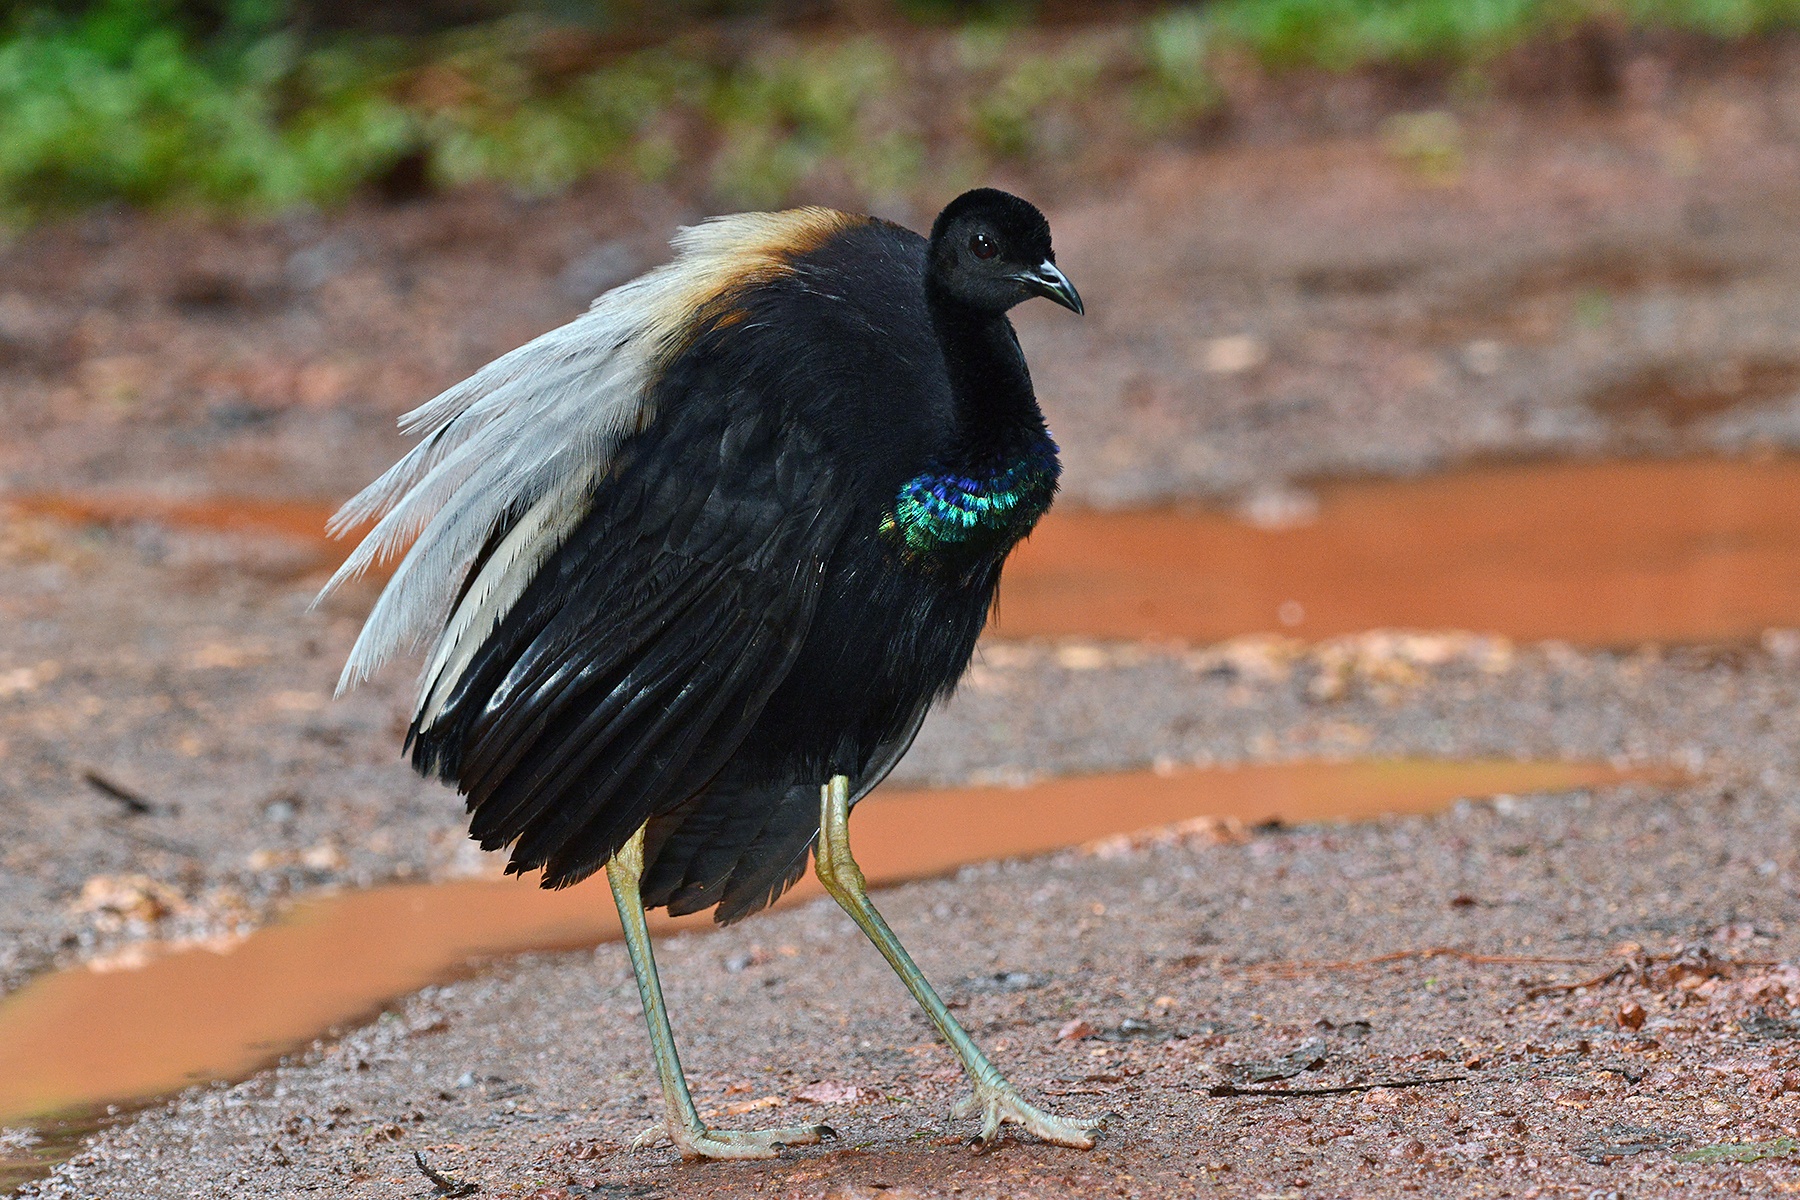 Grey-winged Trumpeter in Suriname (image by Dani López-Velasco)